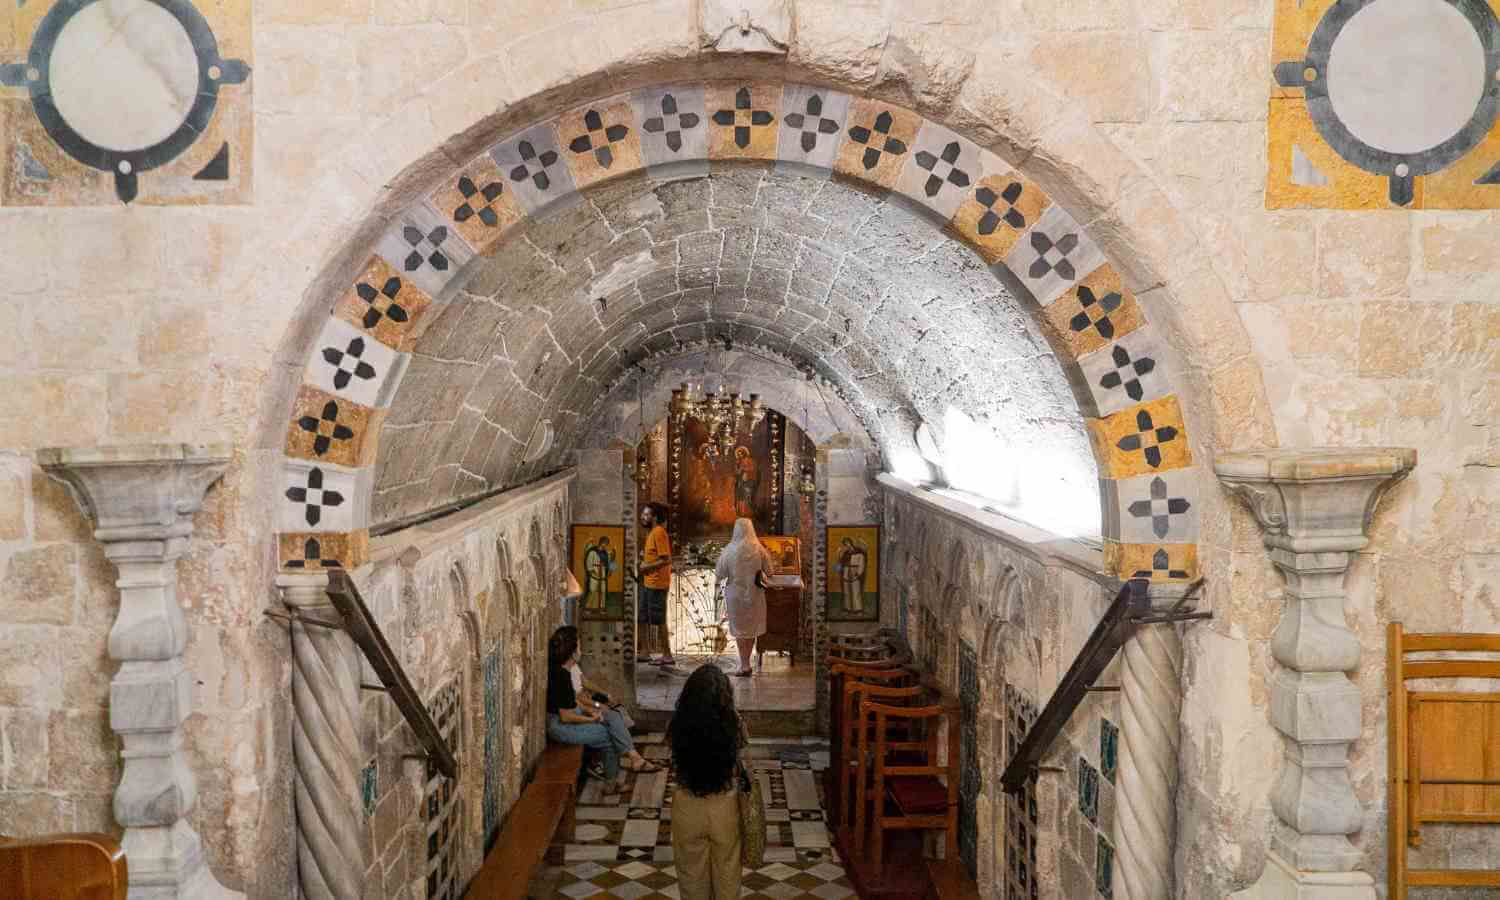 things to do in nazareth